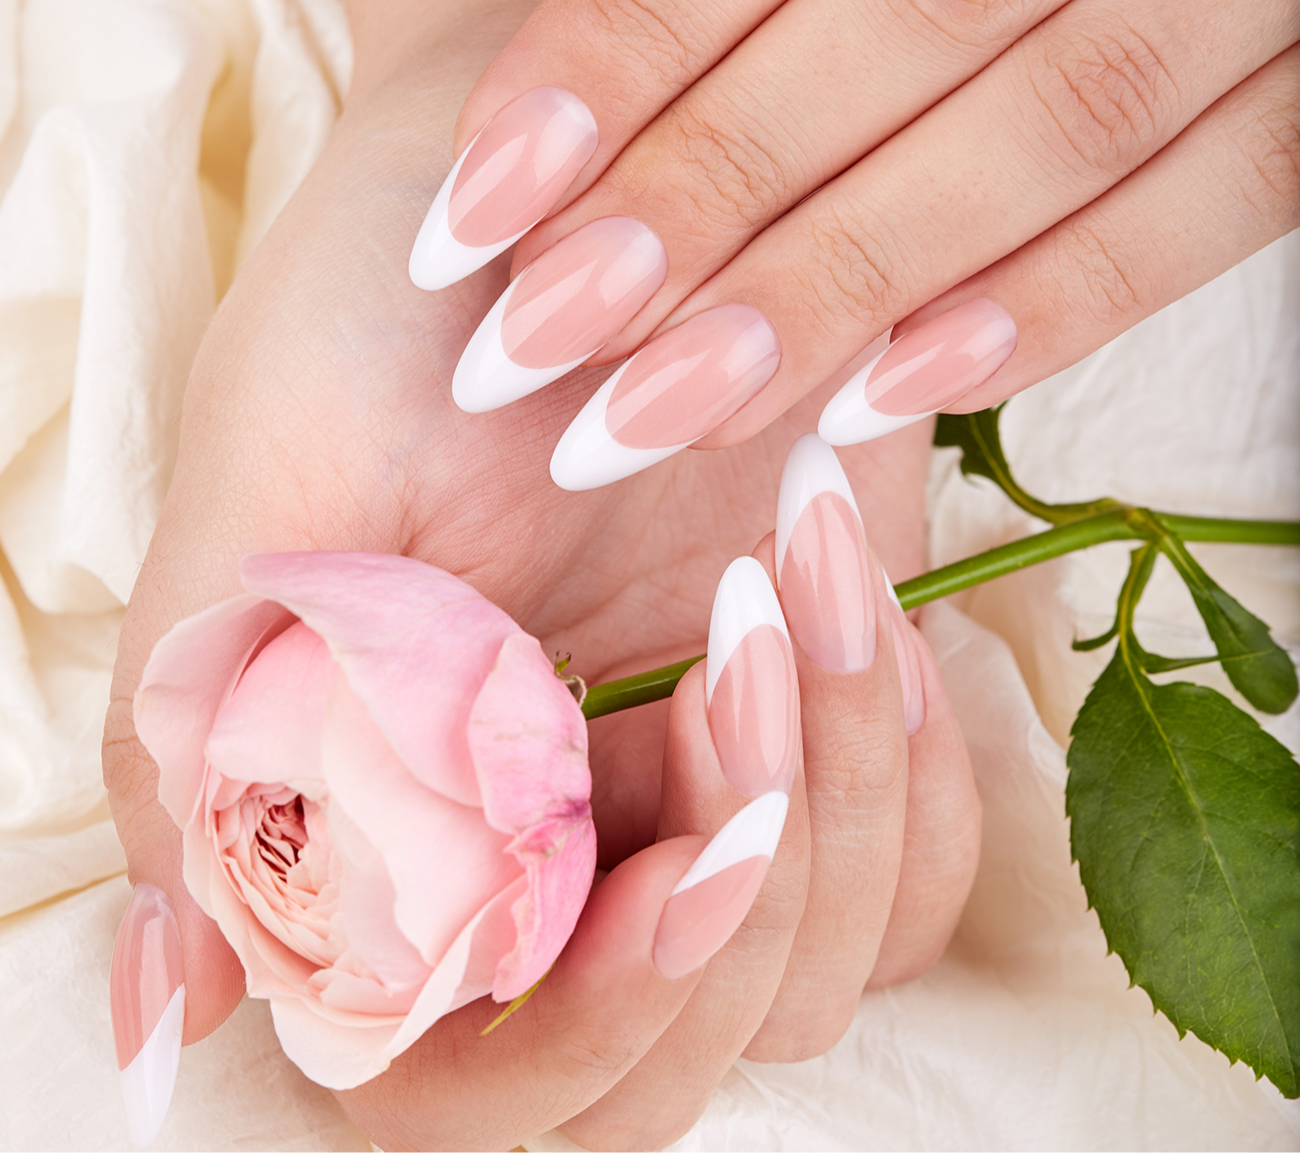 Almond-shaped nails visually make fingers longer, but are less comfortable compared to oval ones.